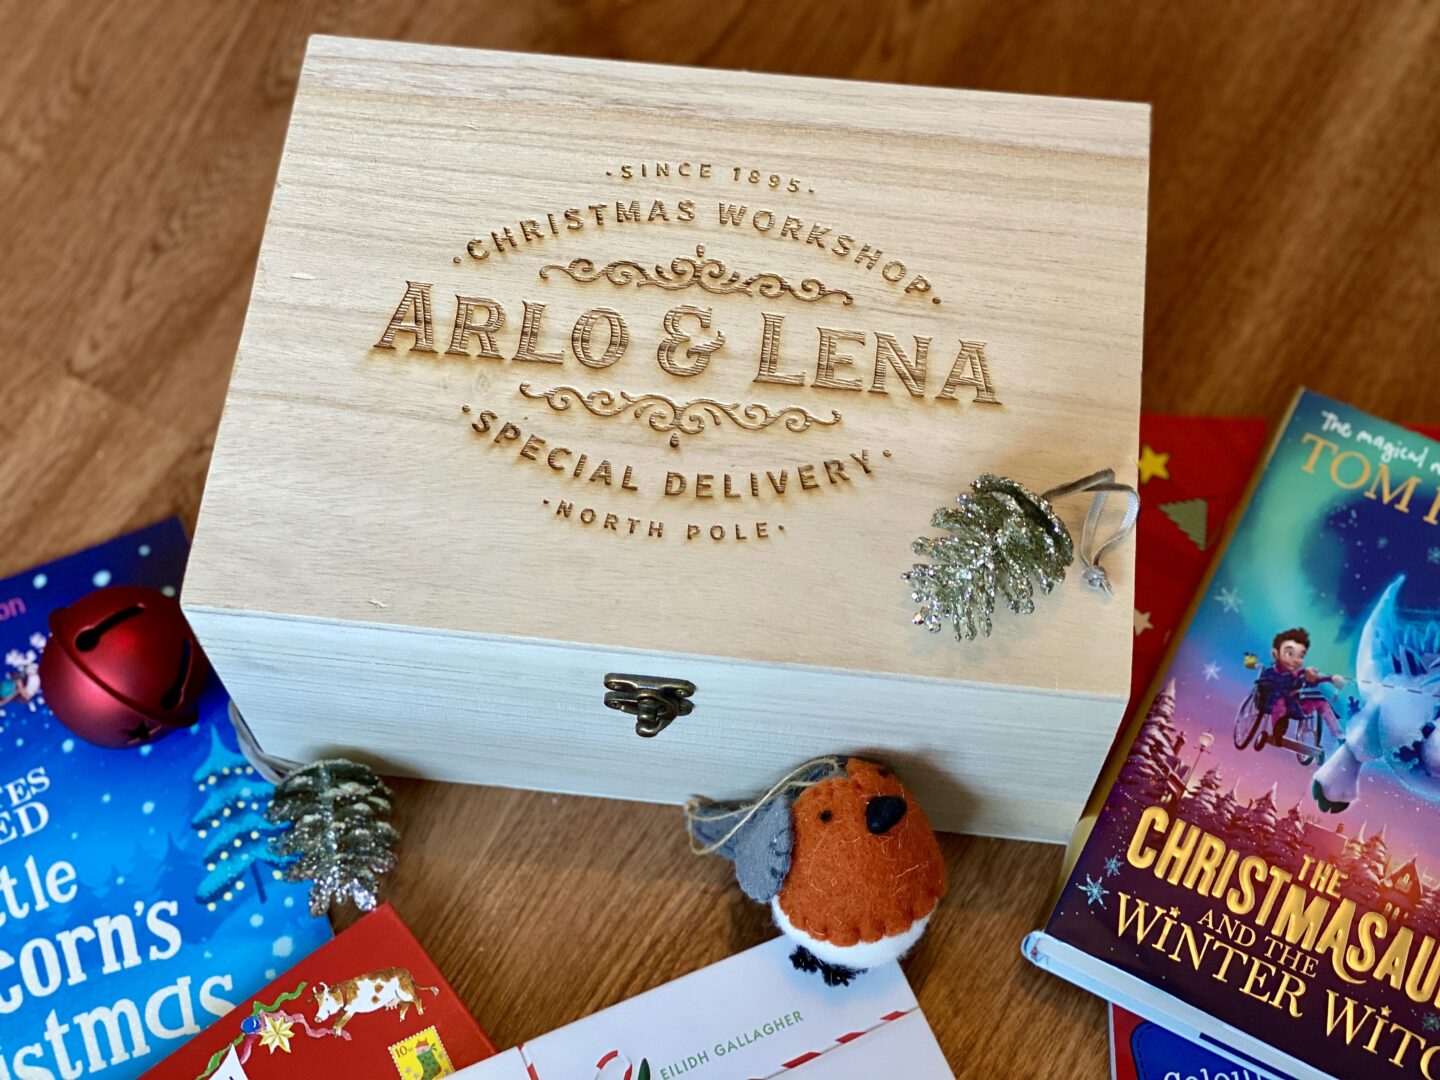 An engraved wooden Christmas tree day box that has the names to Arlo and Lena engraved in it. Surrounded by christmas books